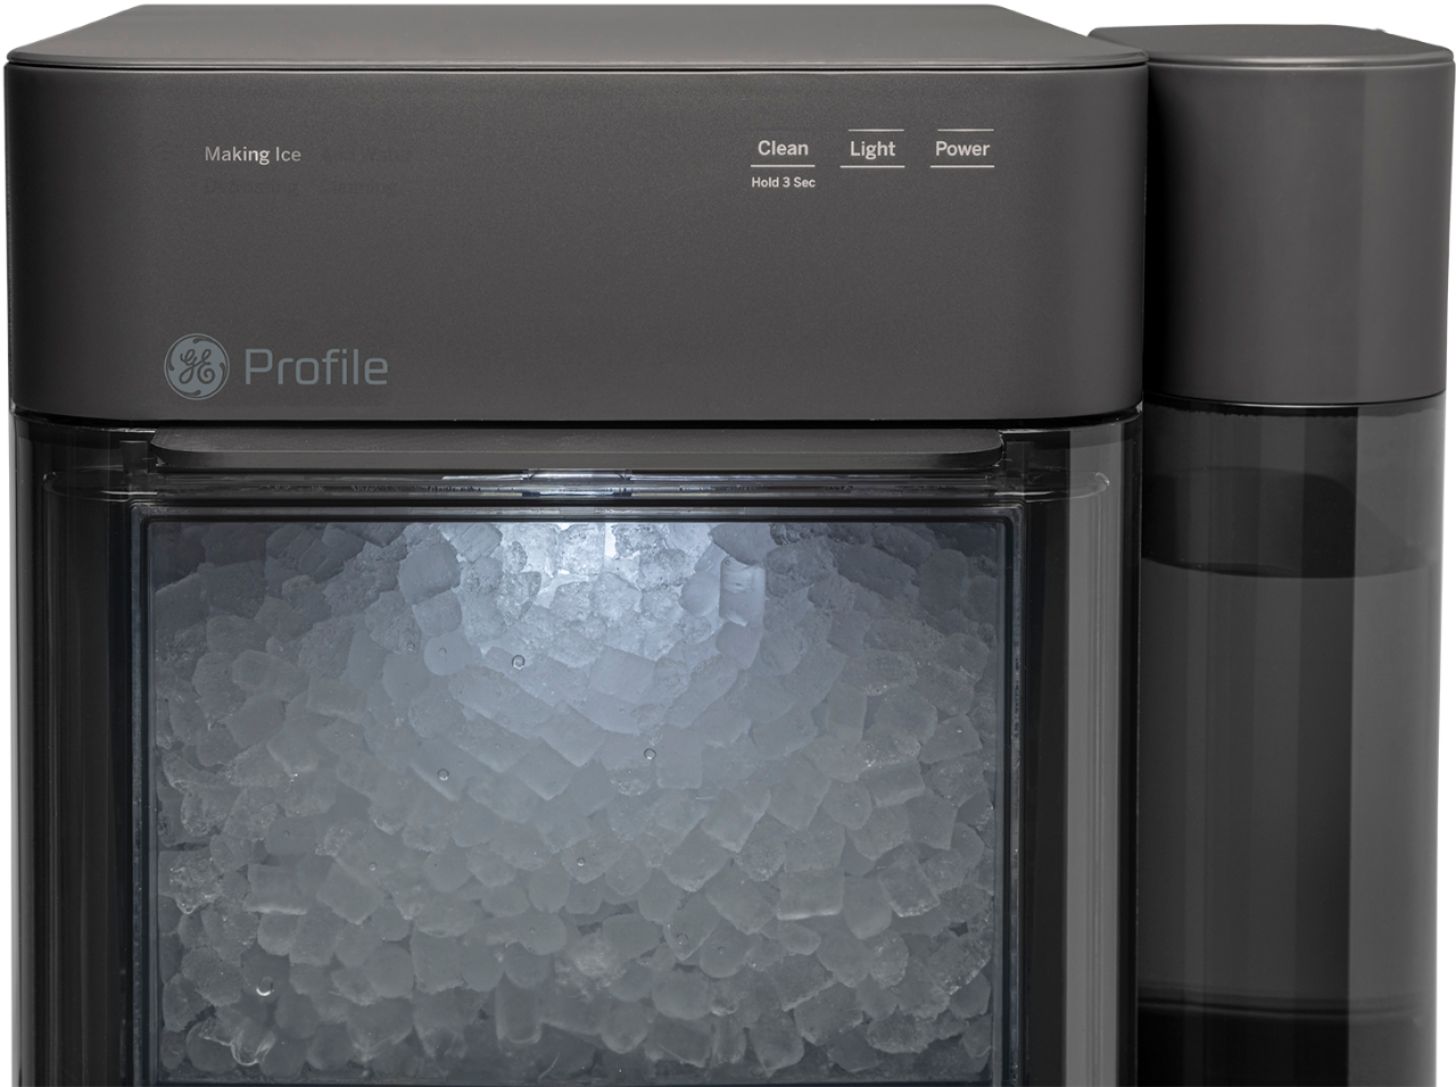 GE Profile Opal 2.0 | Countertop Nugget Ice Maker | Ice Machine with WiFi  Connectivity | Smart Home Kitchen Essentials | Black Stainless